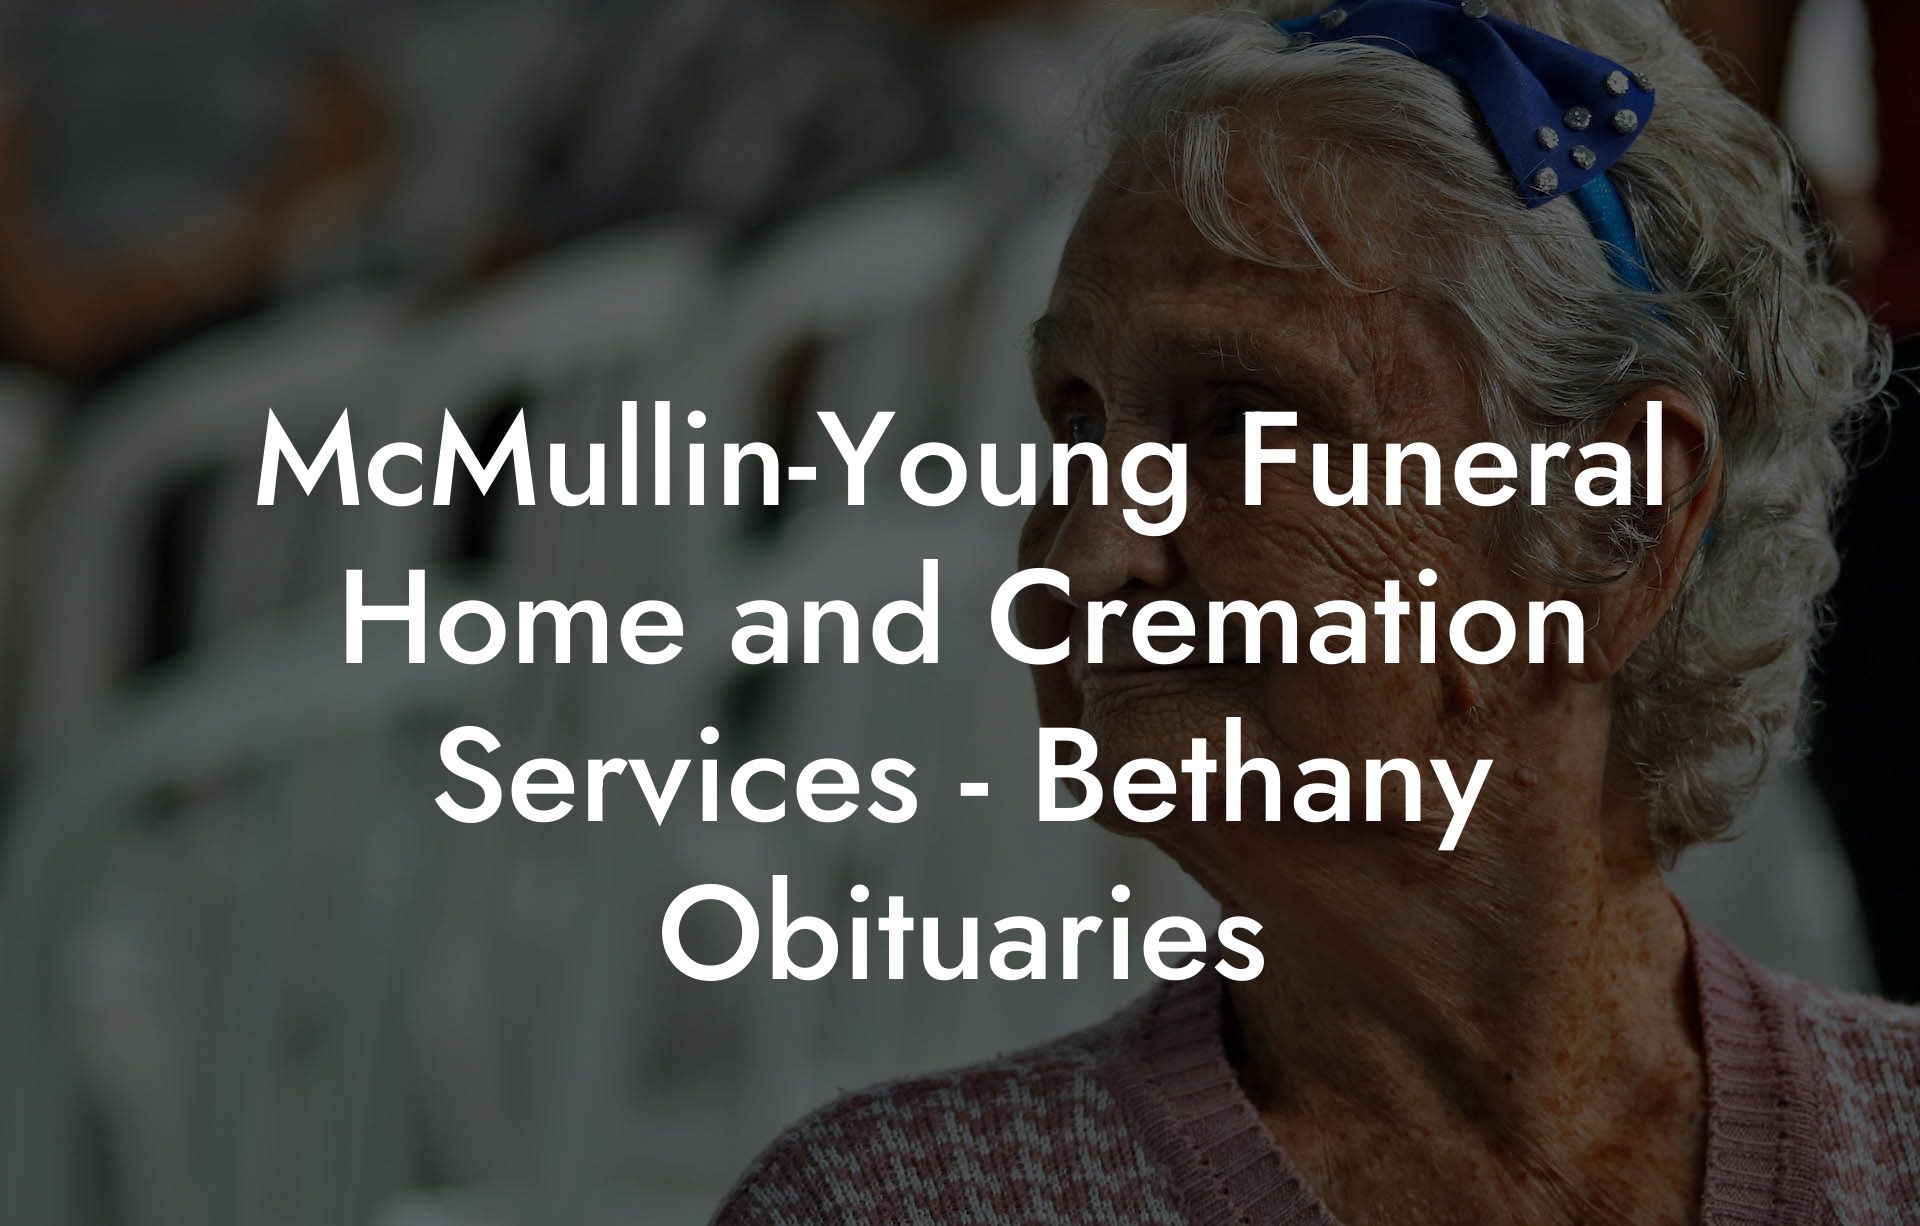 McMullin-Young Funeral Home and Cremation Services - Bethany Obituaries